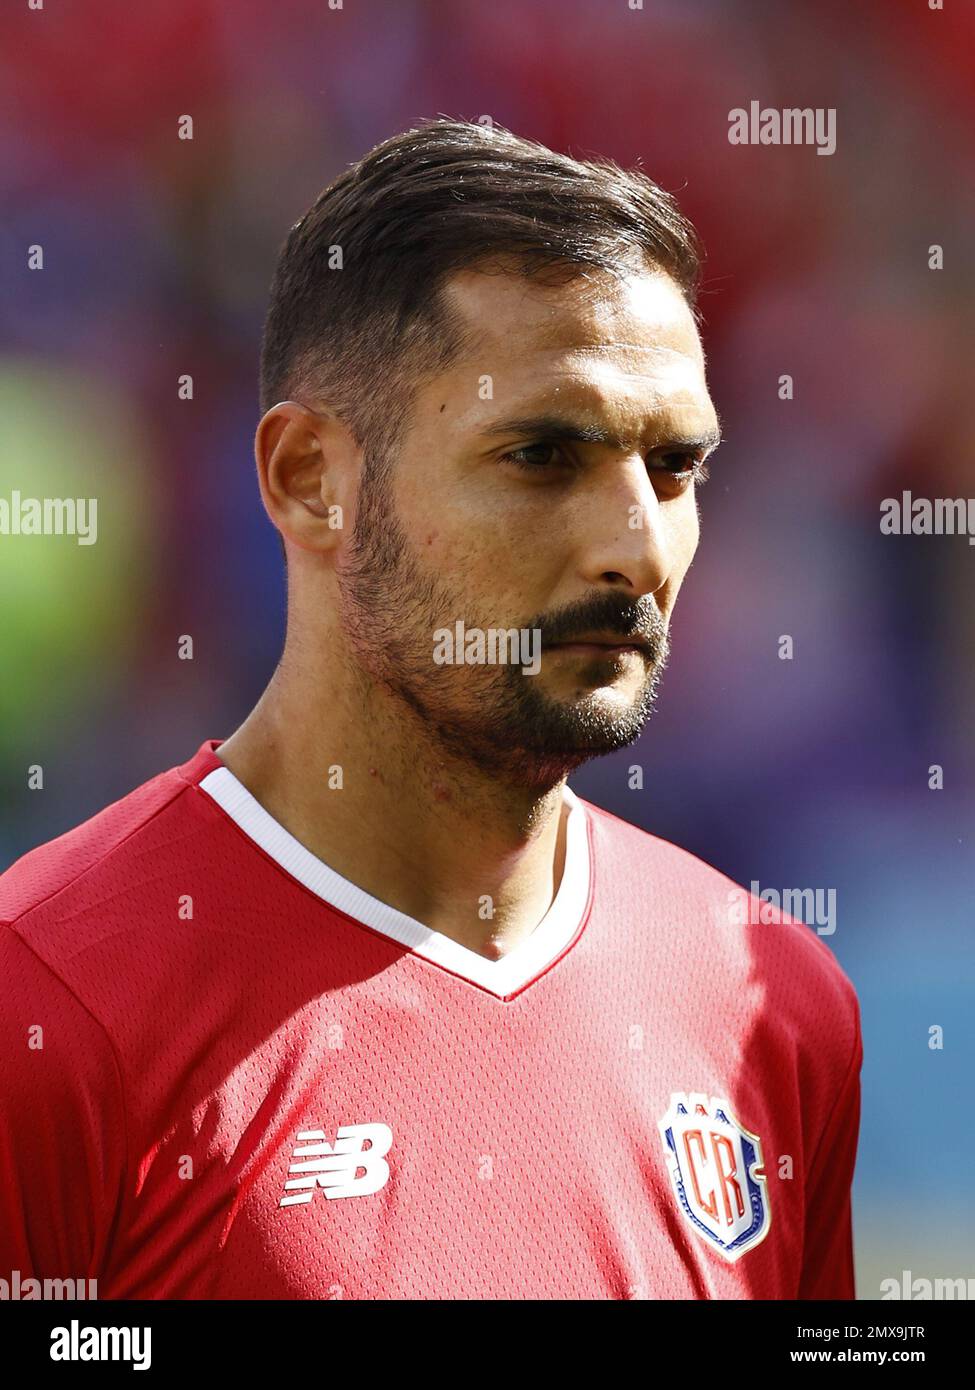 AL-RAYYAN Celso Borges of Costa Rica during the FIFA World Cup Qatar 2022 group E match between Japan and Costa Rica at Ahmad Bin Ali Stadium on November 27, 2022 in Al-Rayyan, Qatar. AP | Dutch Height | MAURICE OF STONE Stock Photo